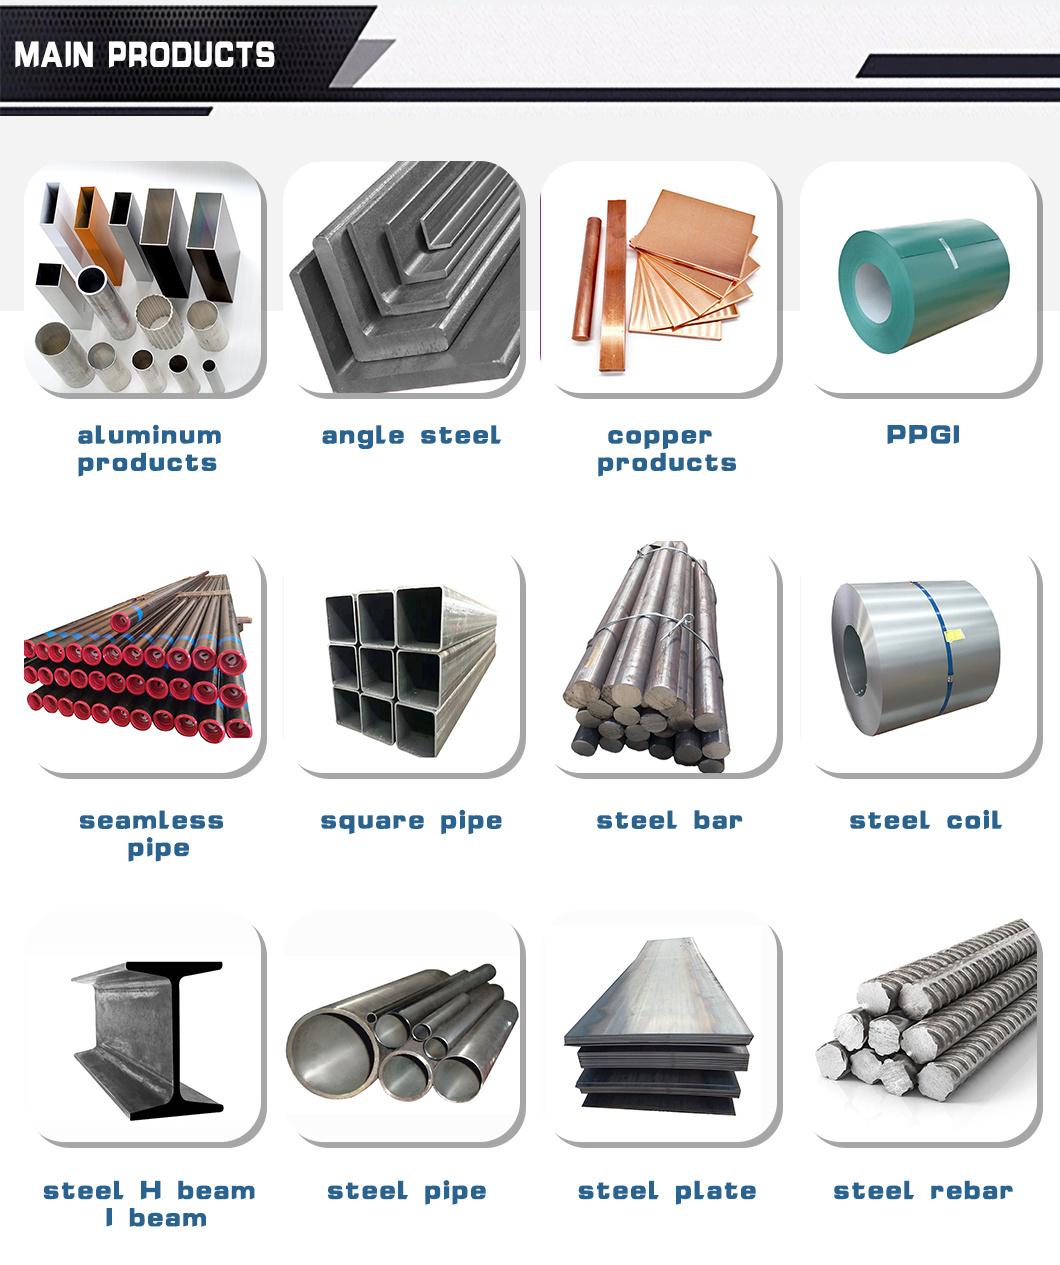 JIS Ss400 Ss540 Hot Rolled Hot Dipped Equal Angle Bars Galvanized Steel Angle Iron Bar